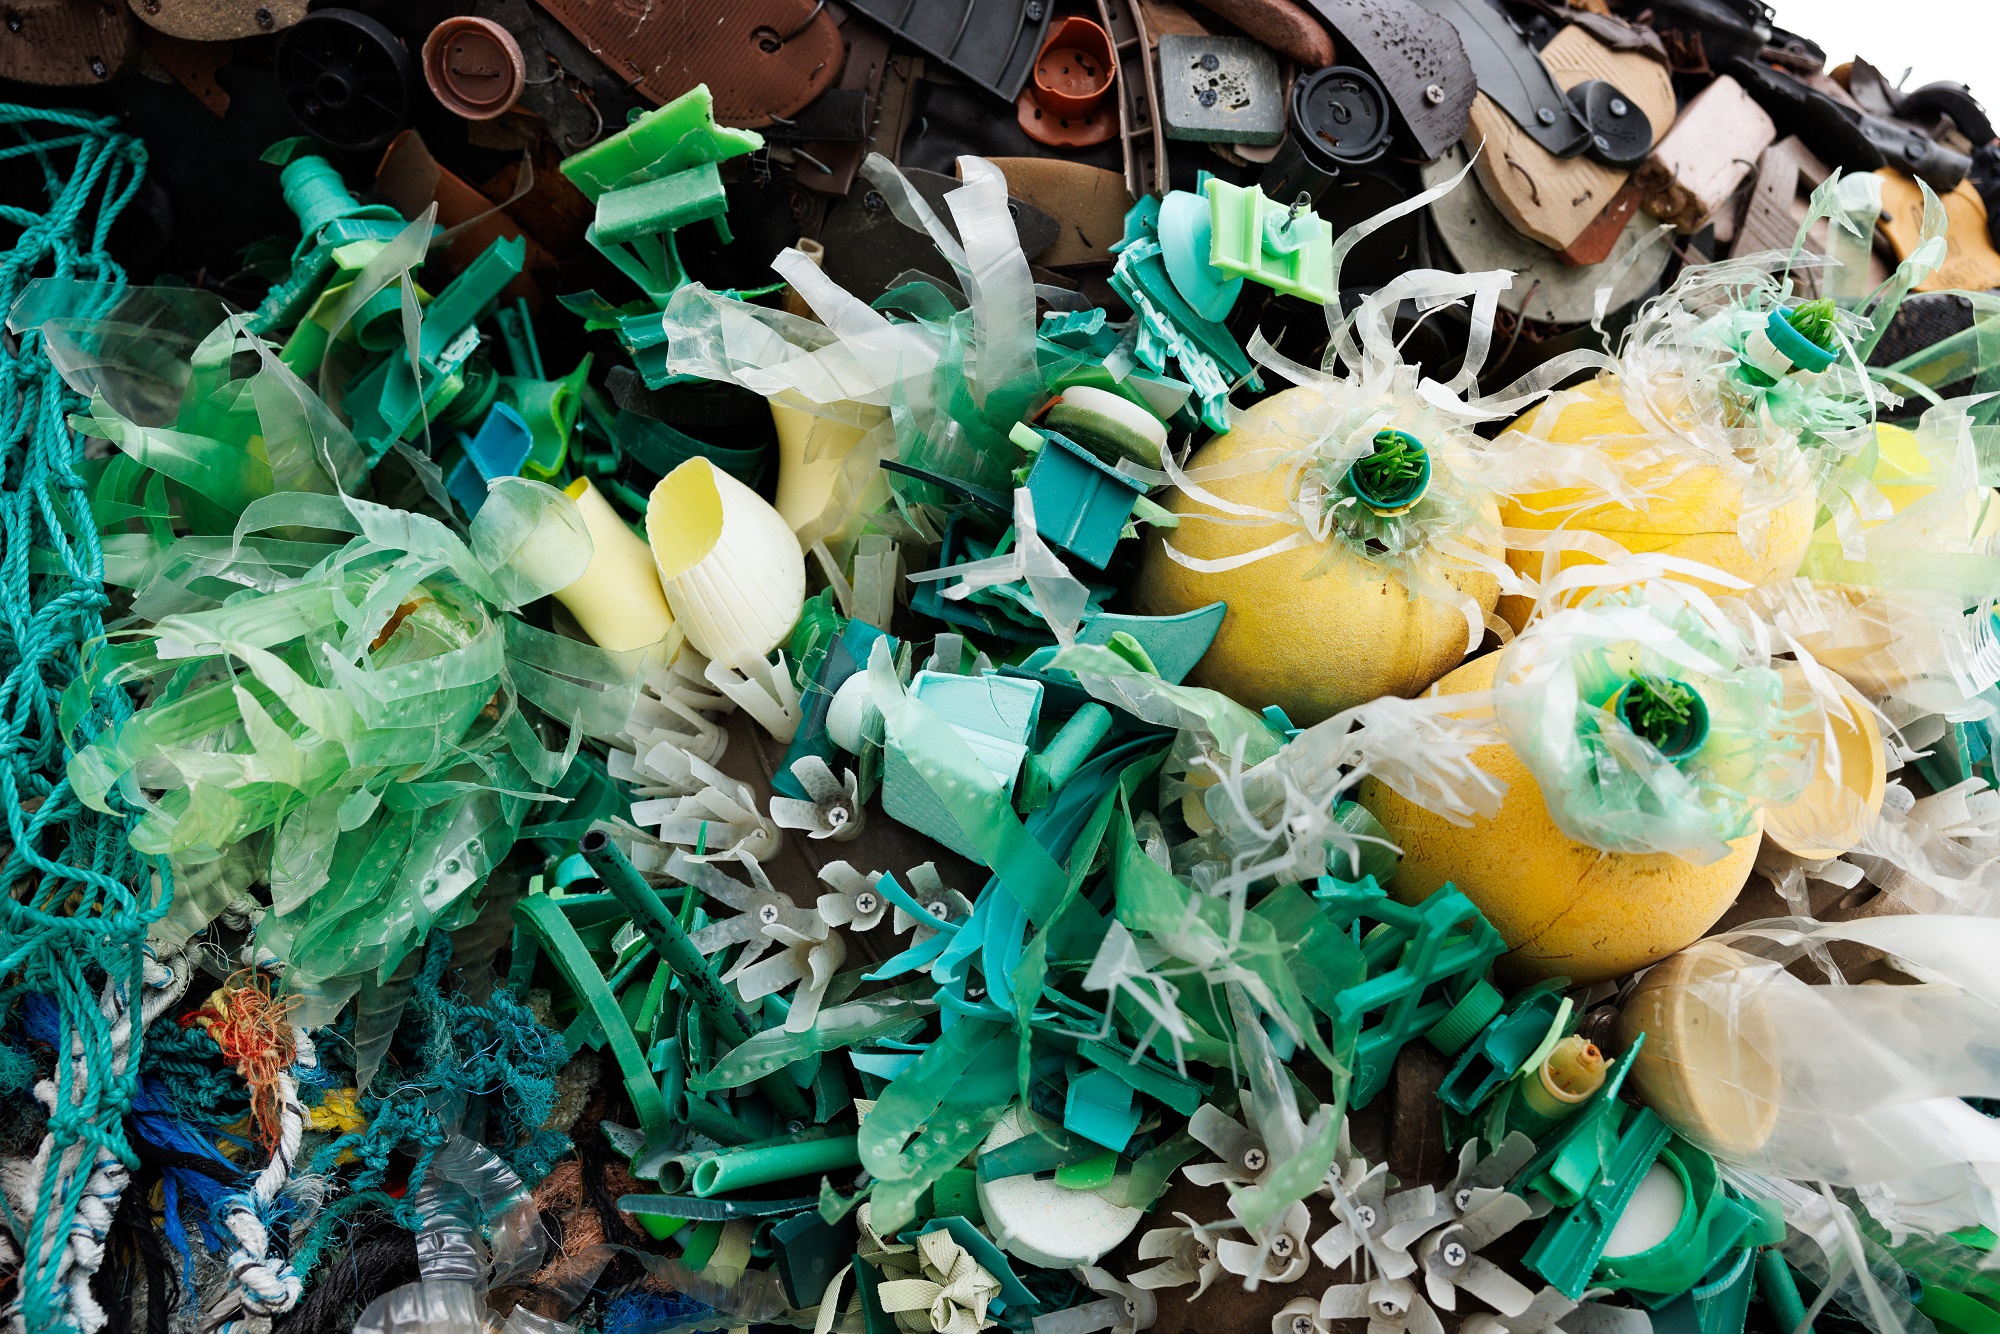 Each work of art is comprised of thousands of pieces of plastic that washed up on beaches.